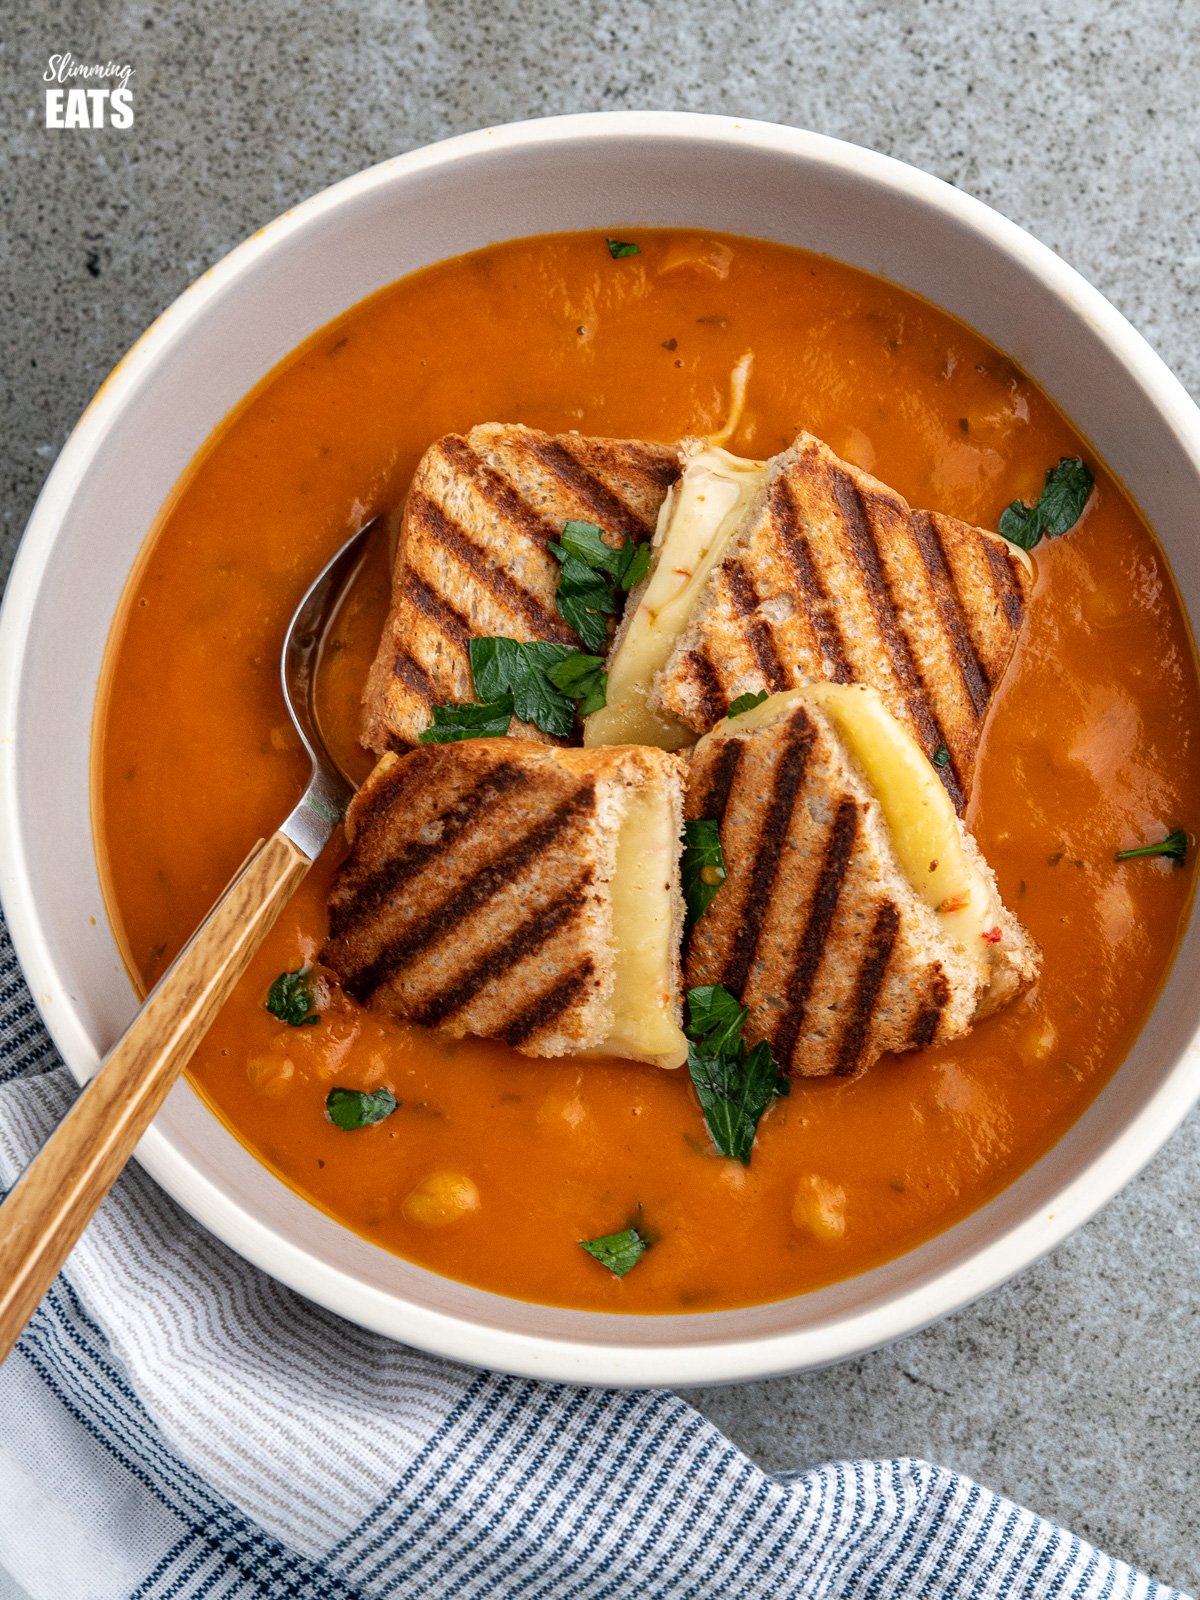 grilled cheese sandwich quarters placed in a  grey bowl of tomato and chickpea soup